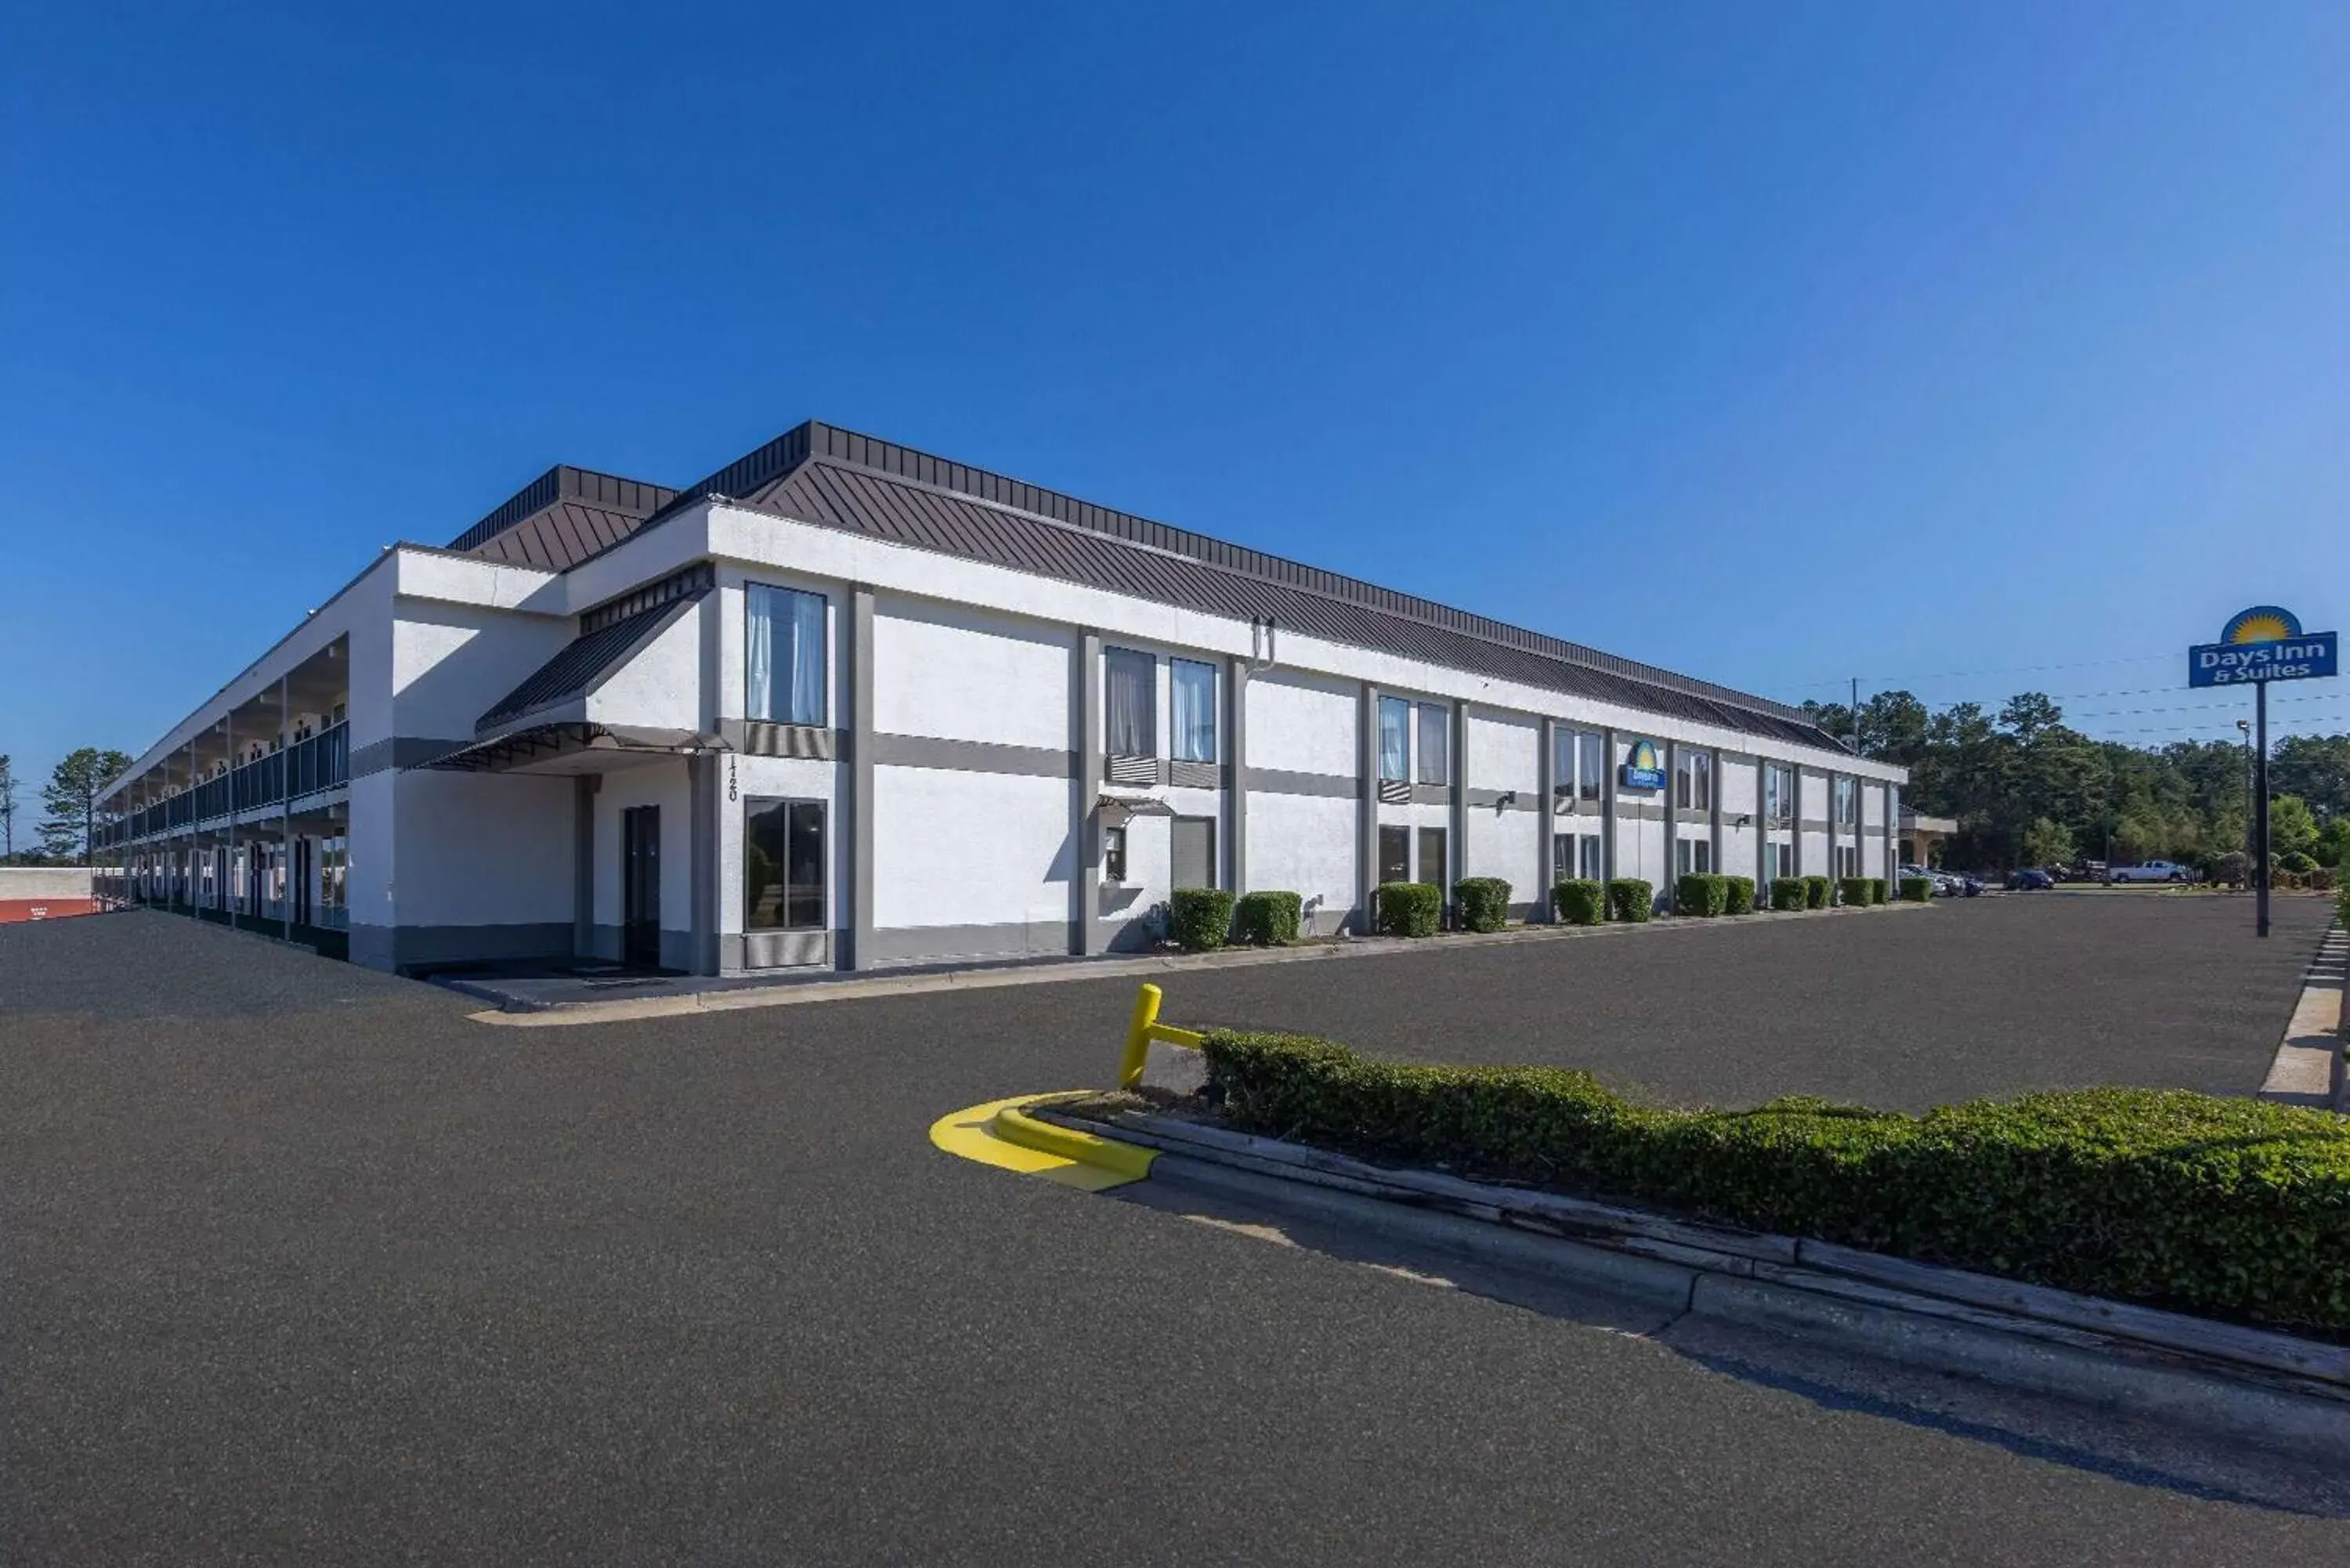 Property Building in Days Inn & Suites by Wyndham Fort Bragg/Cross Creek Mall